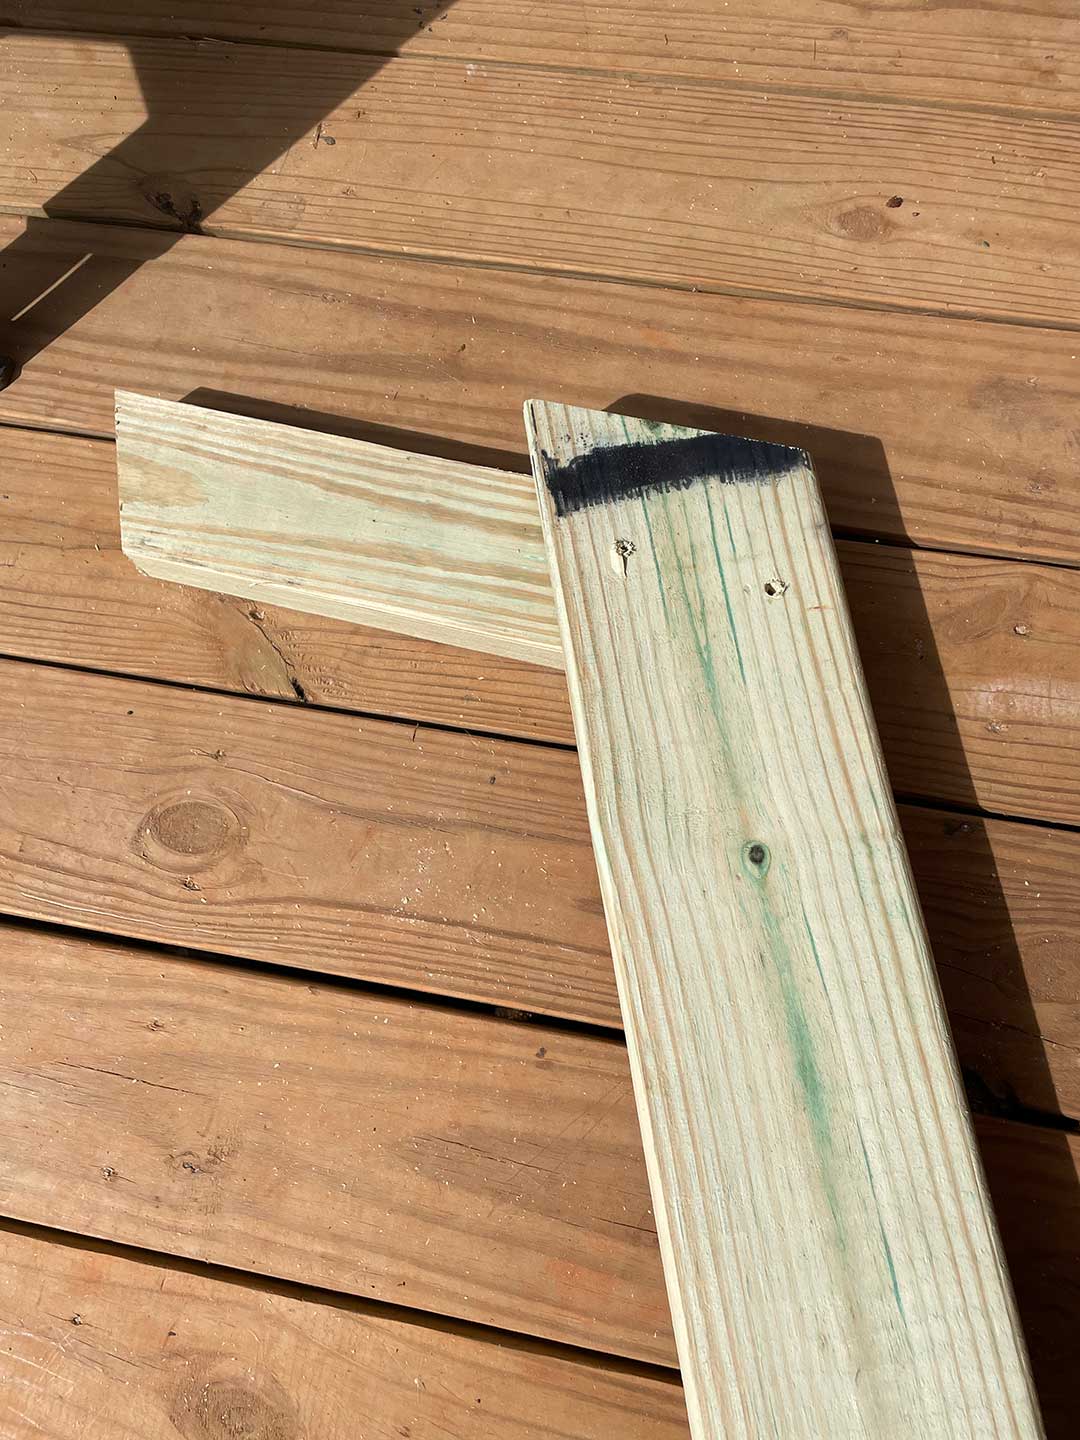 Two pieces of wood laid over a wood deck.